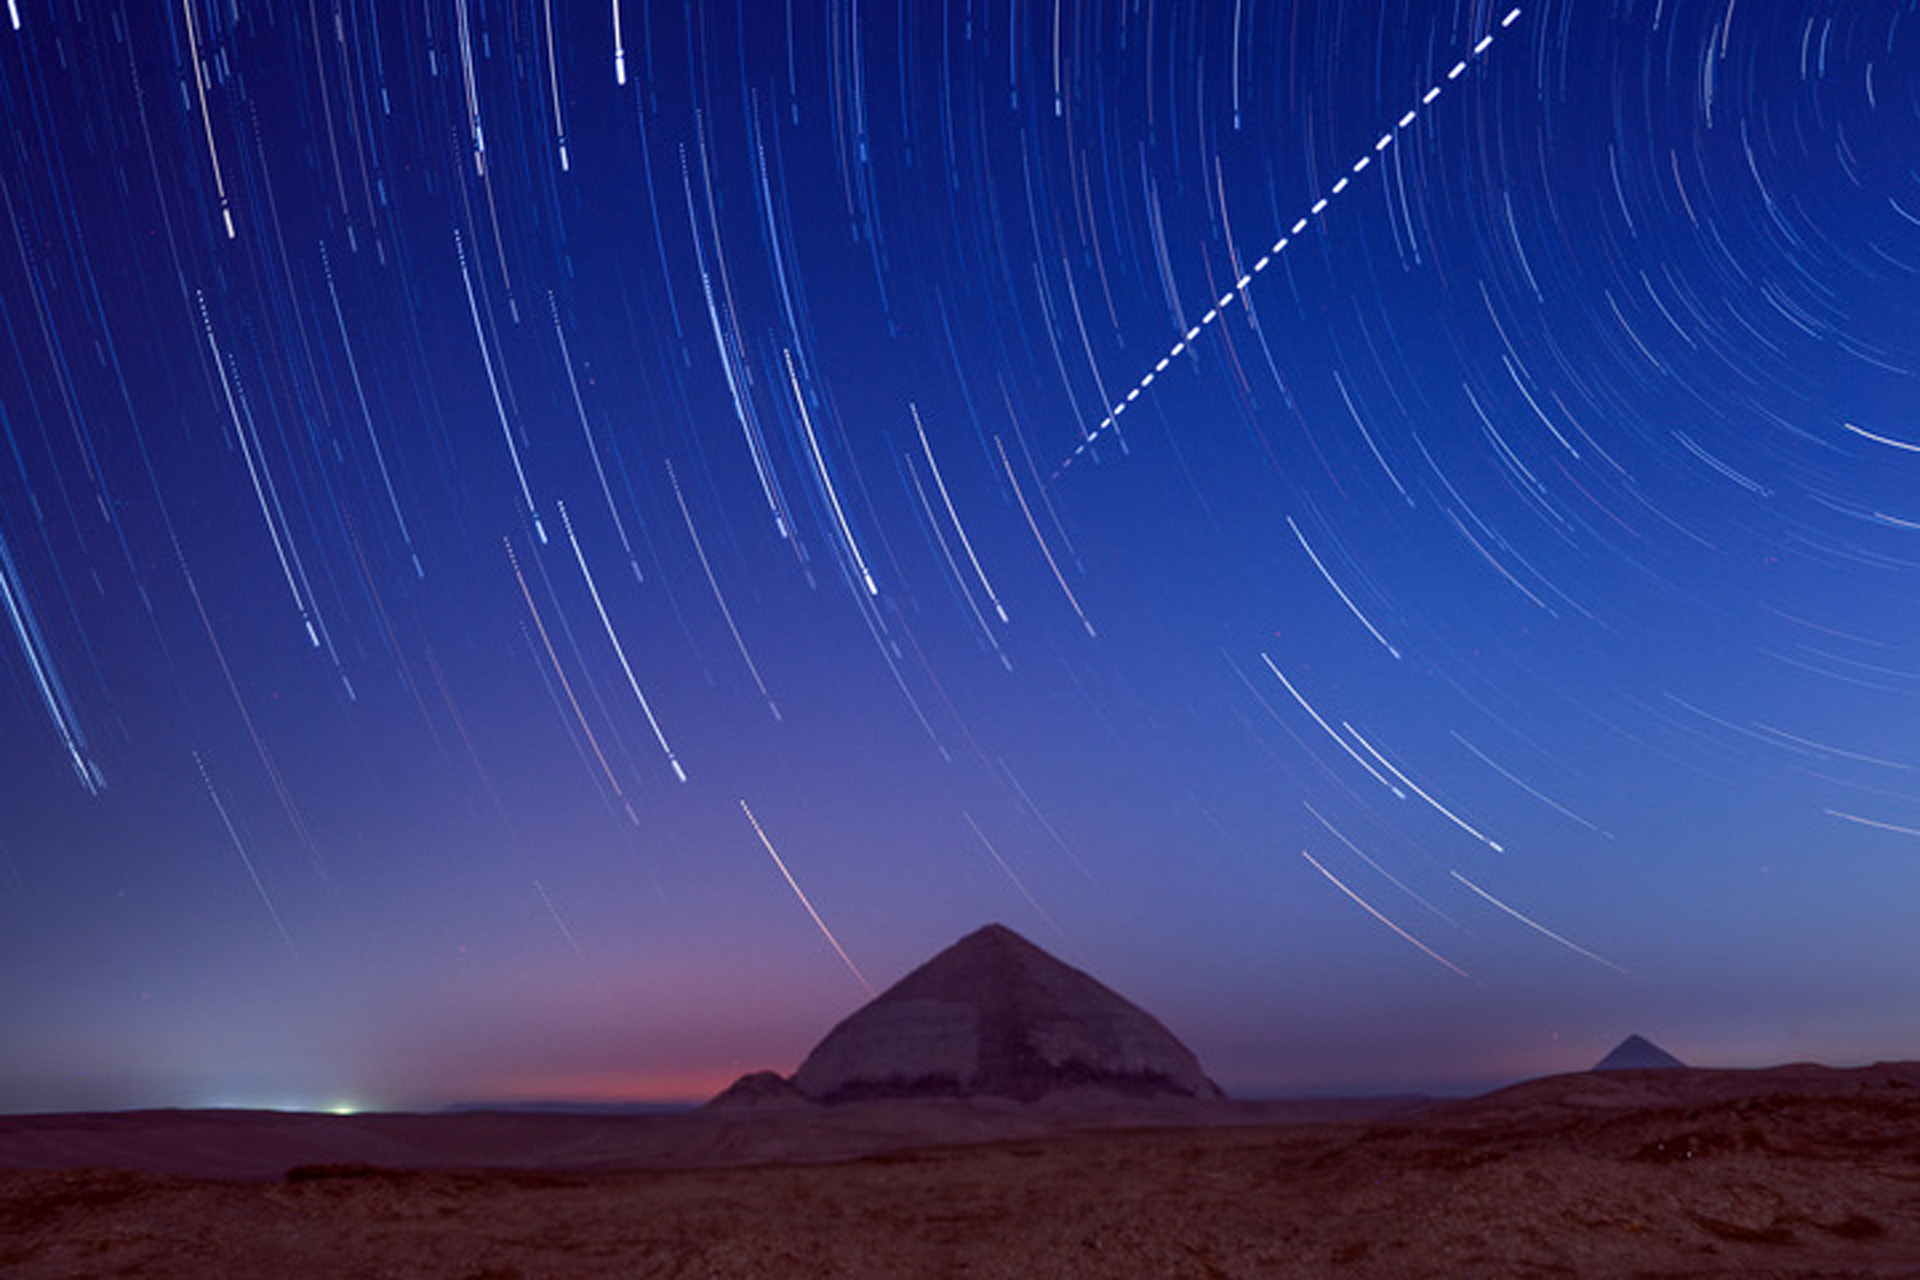 China's space station flies across the sky above the pyramids of Egypt, November 26, 2021. /Sui Xiankai